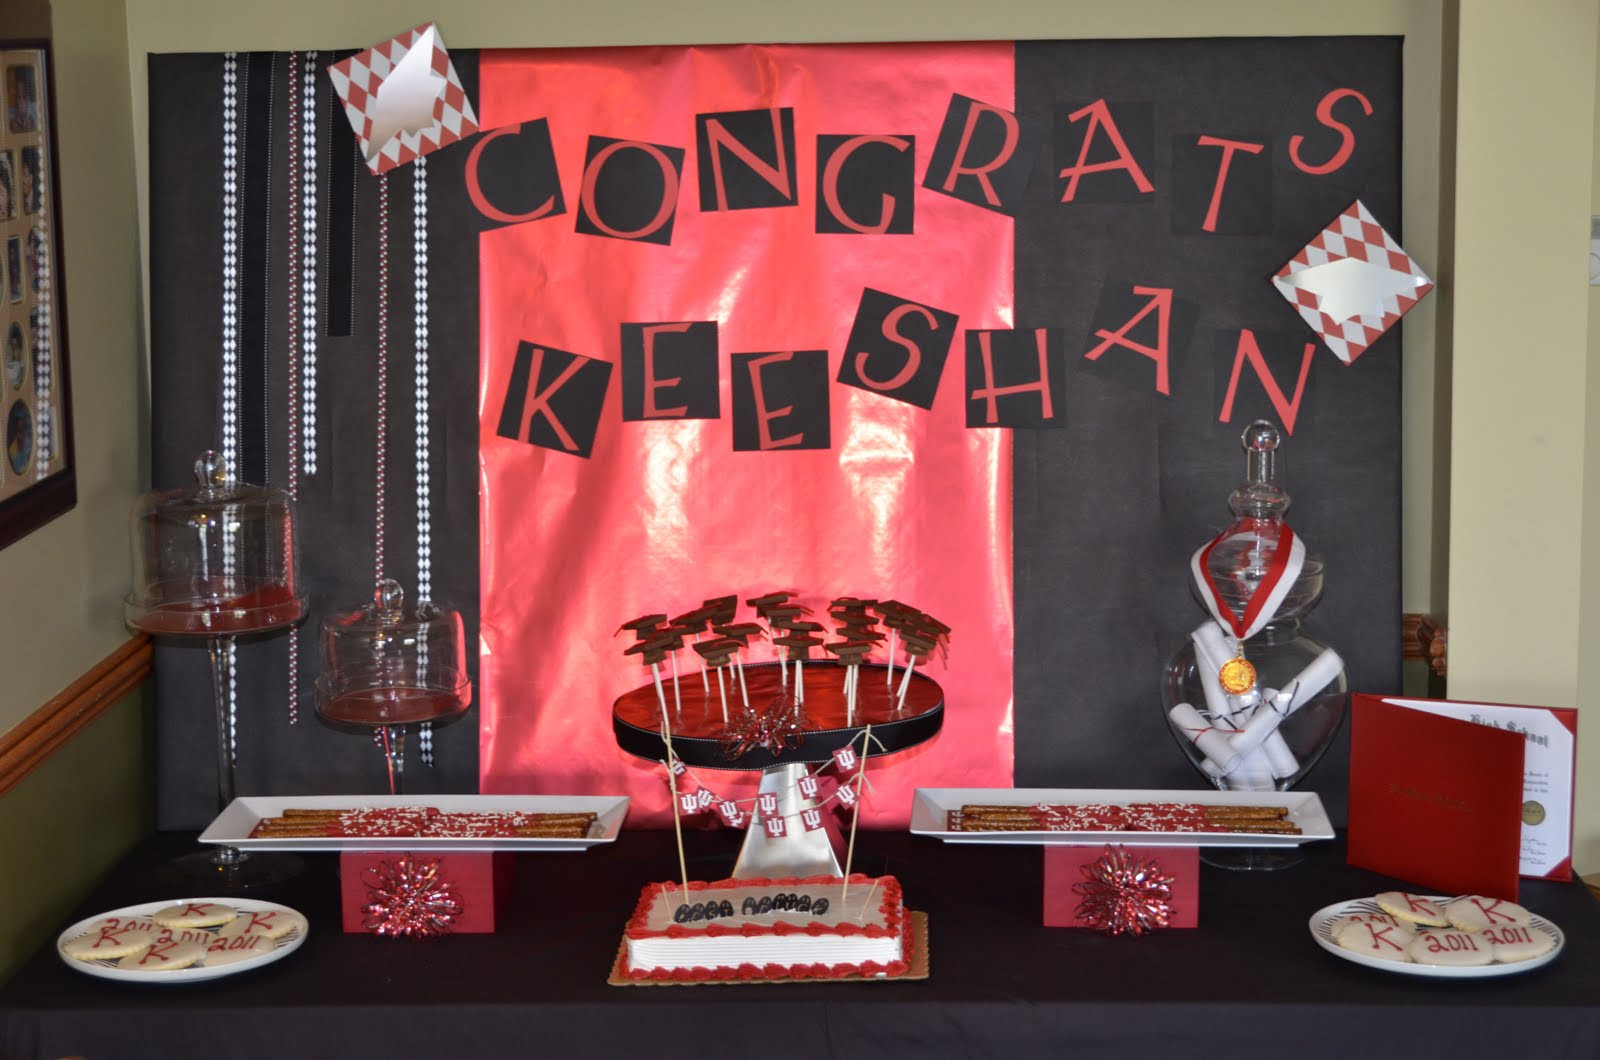 Red White And Black Graduation Party Ideas
 Graduation Party Ideas Graduation Party Ideas Black And Red